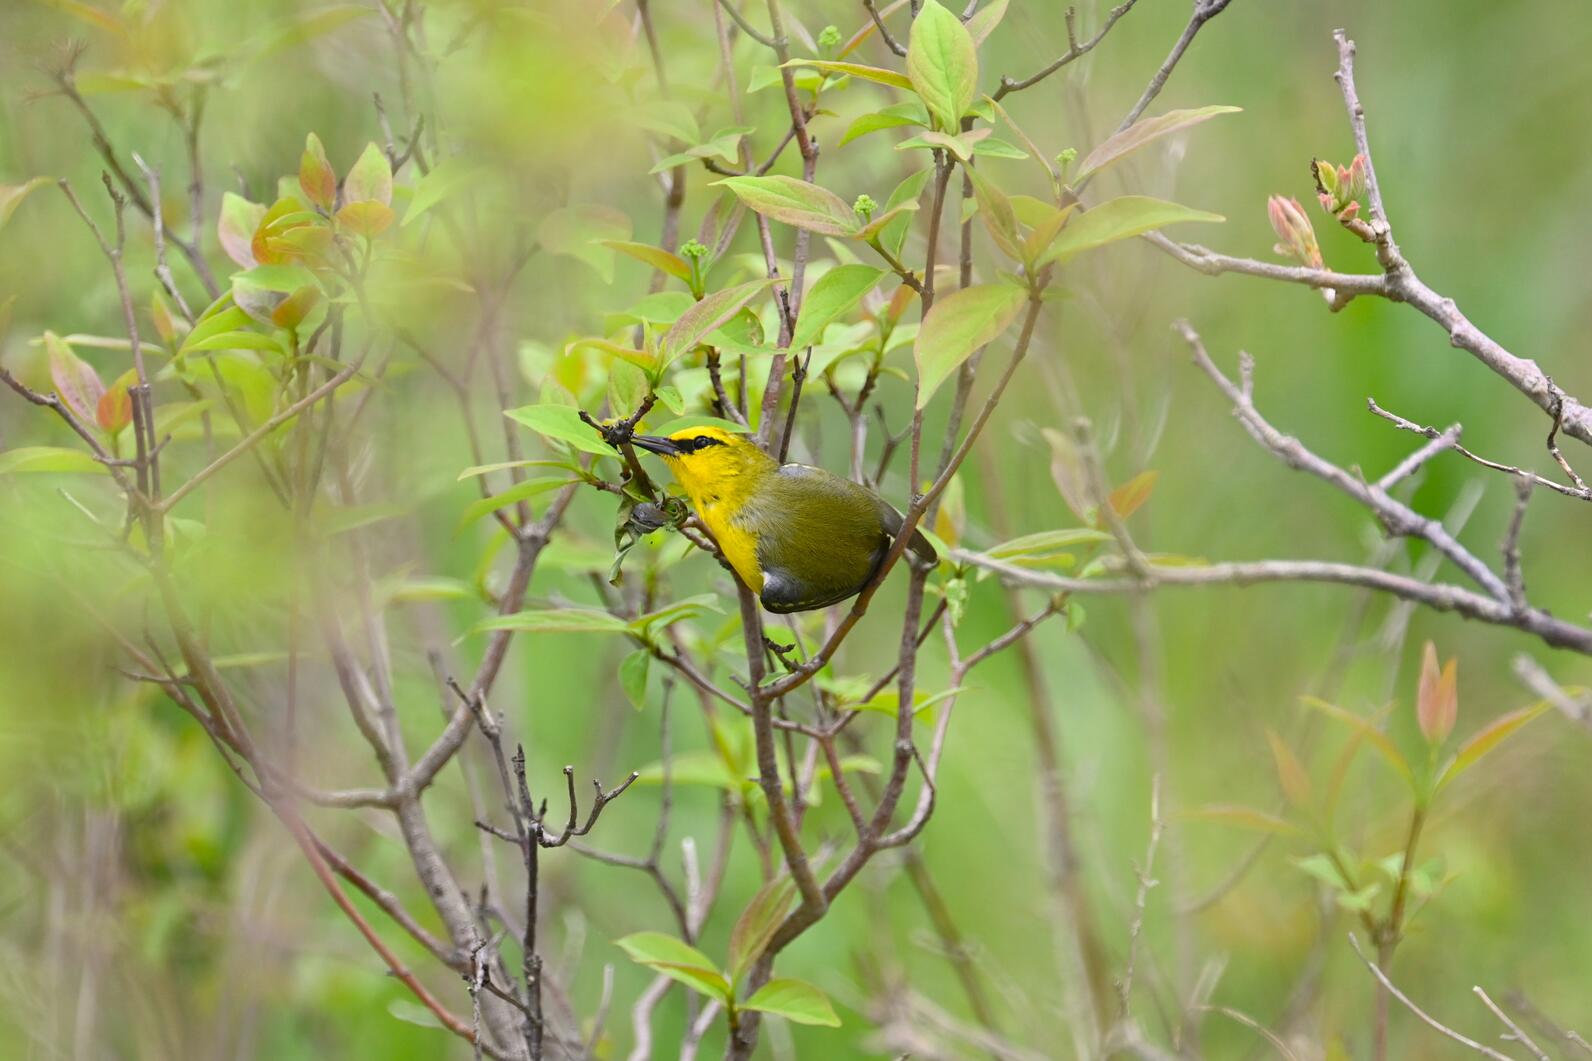 Blue-Winged Warbler perched on a branch